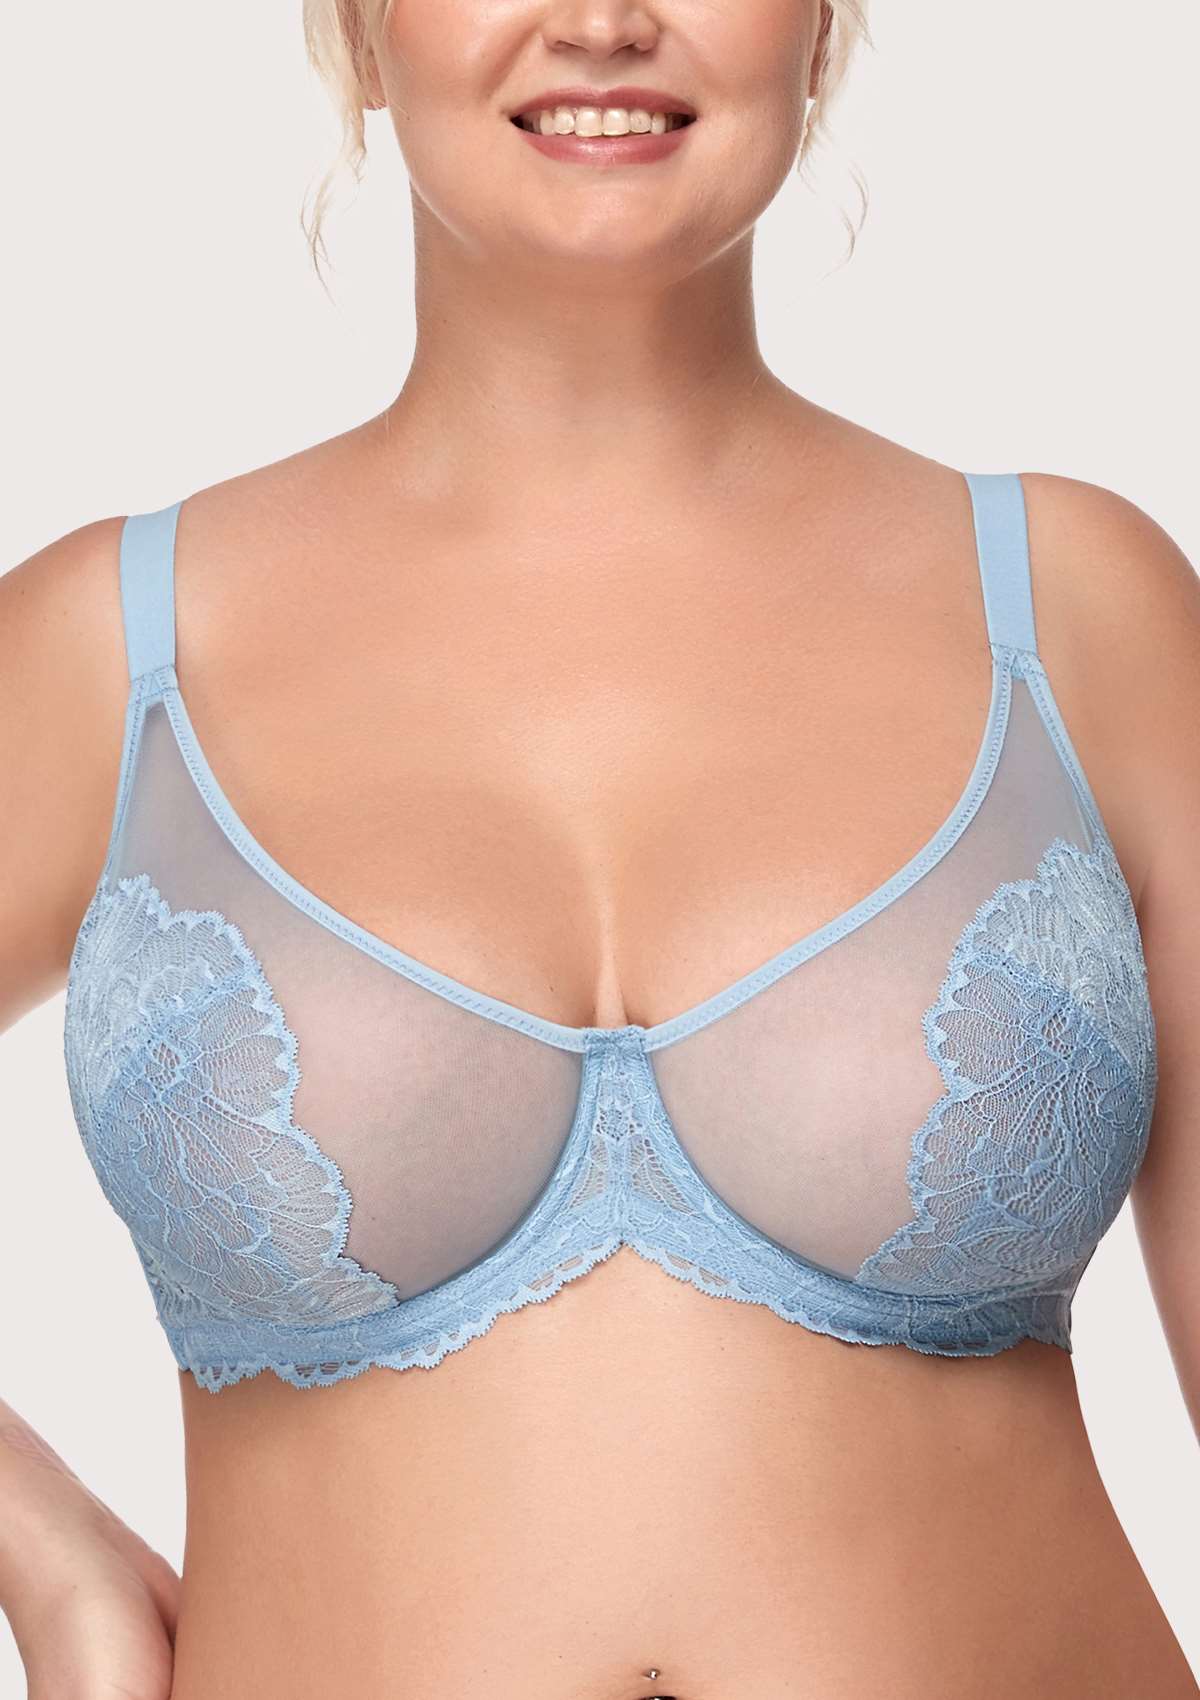 HSIA Blossom Full Coverage Supportive Unlined Underwire Bra Set - Storm Blue / 32 / D